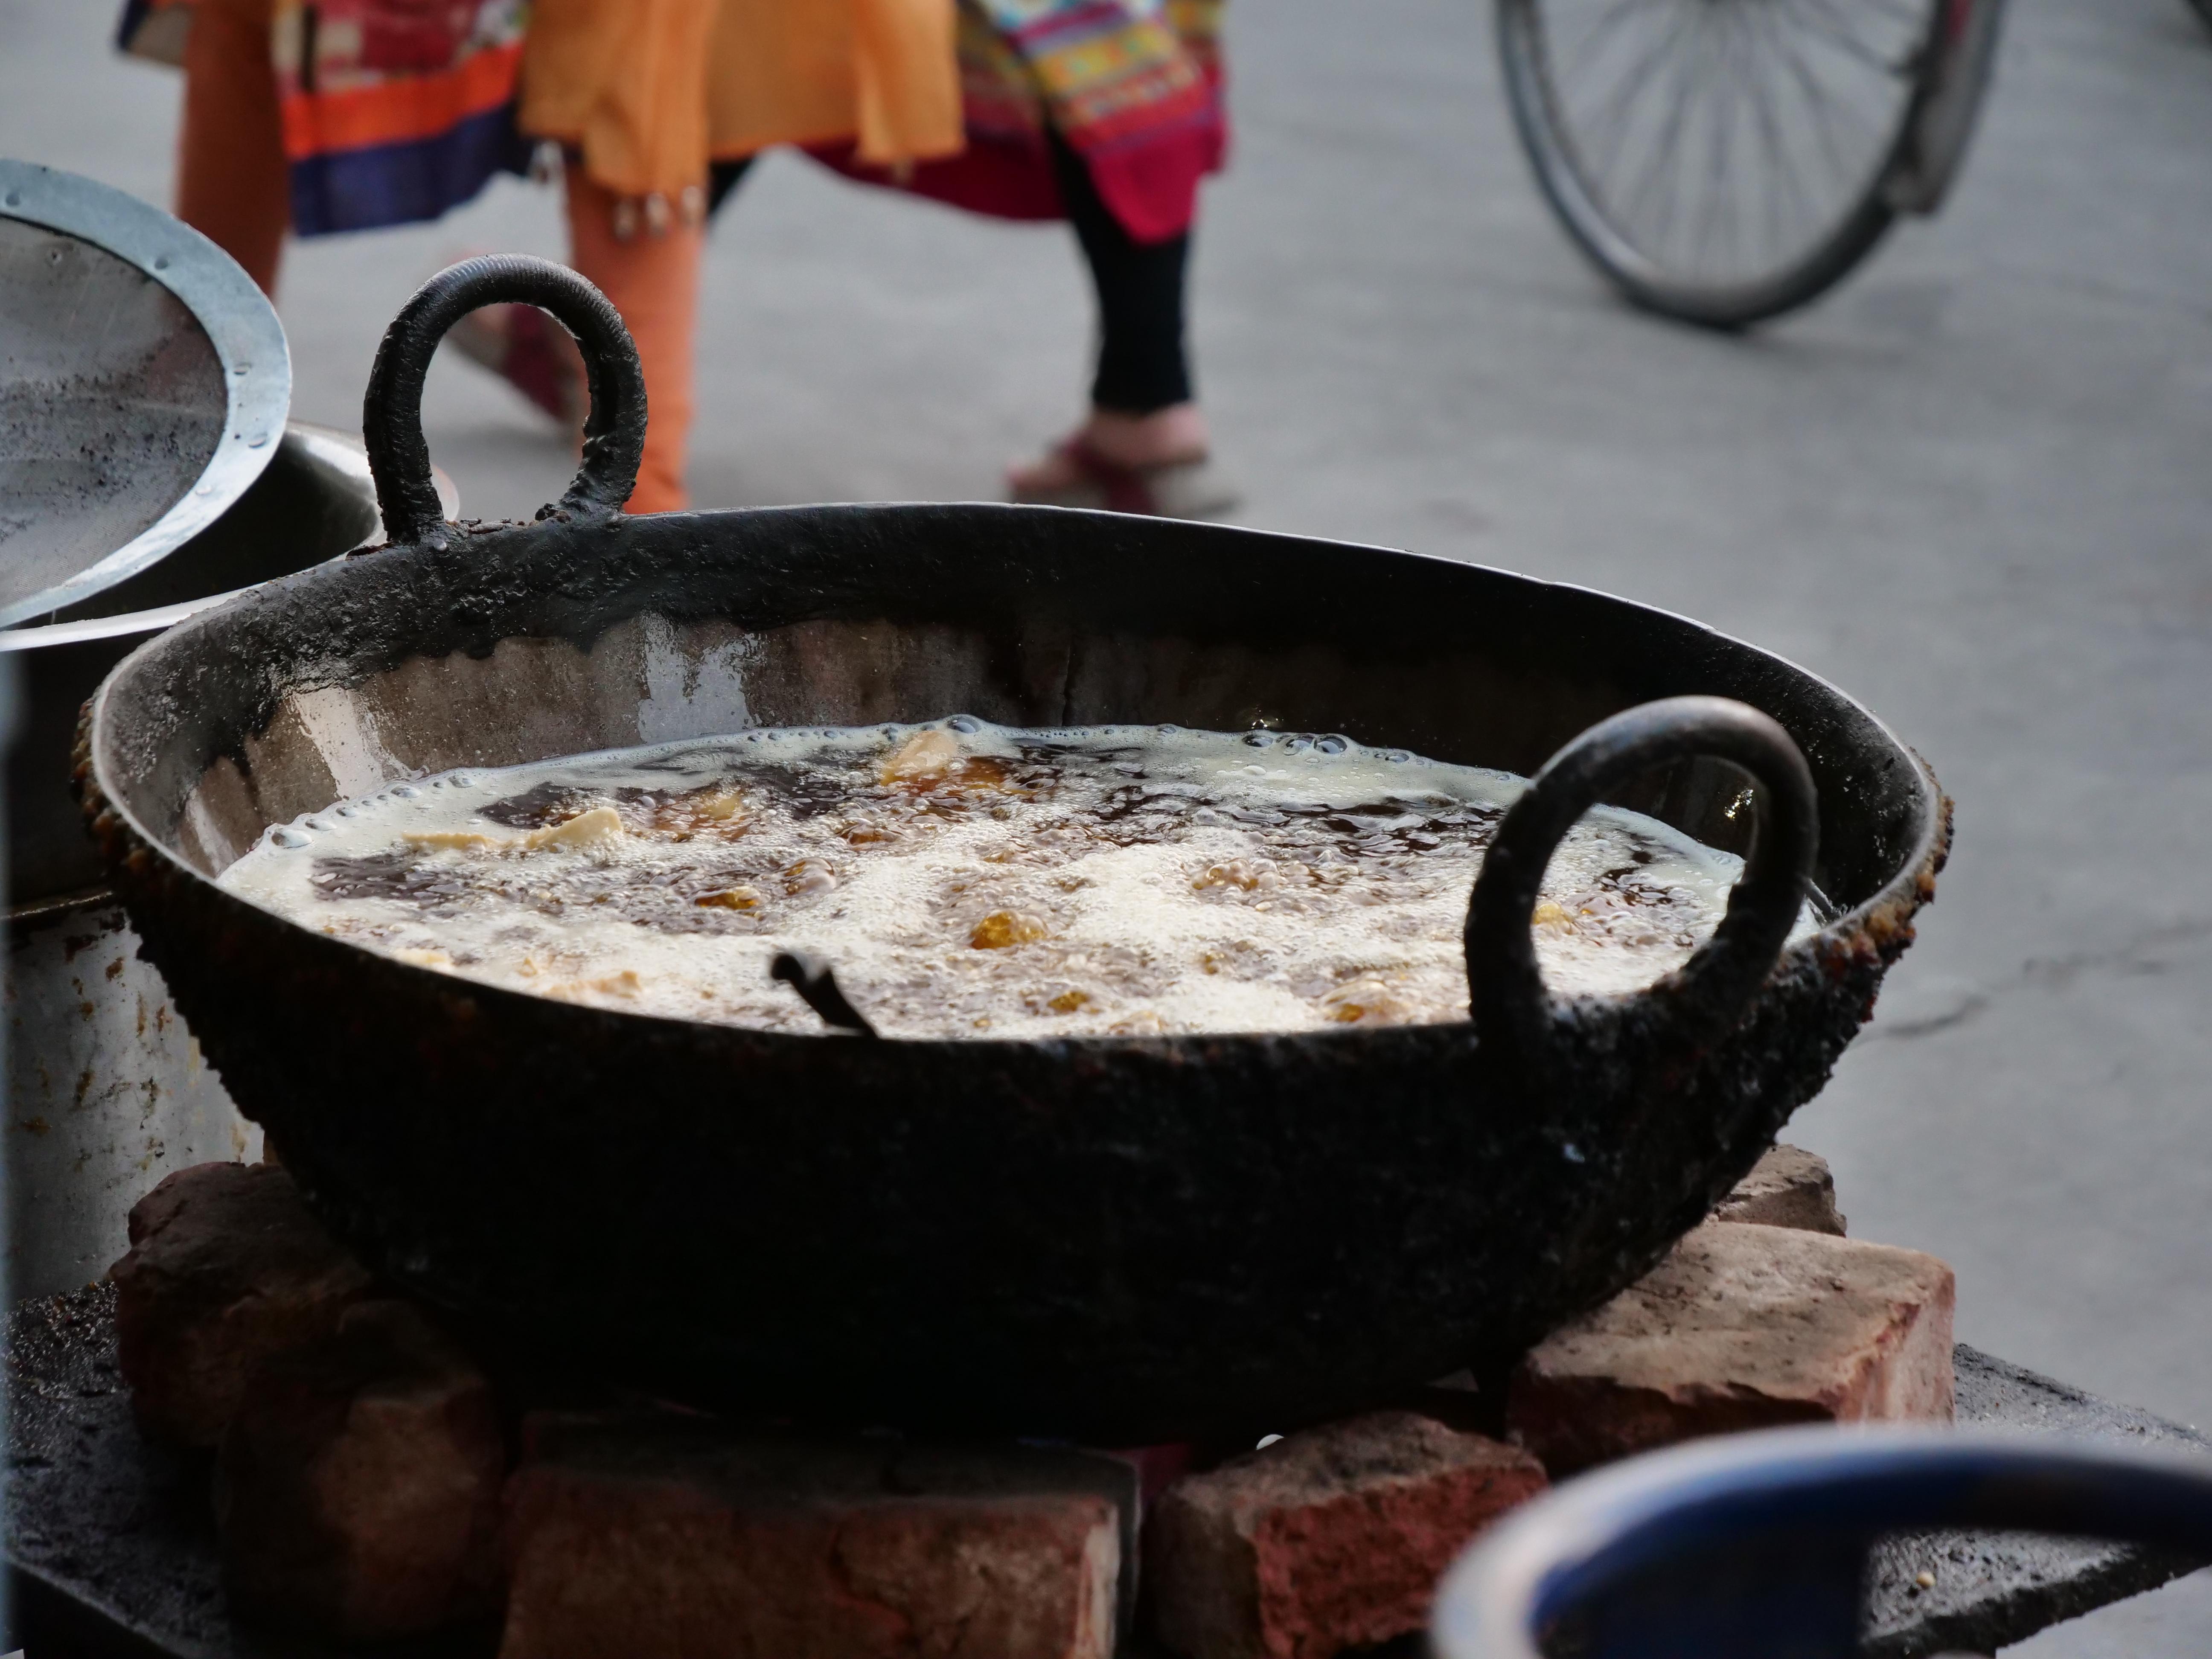 Pot cooking over open fire in India